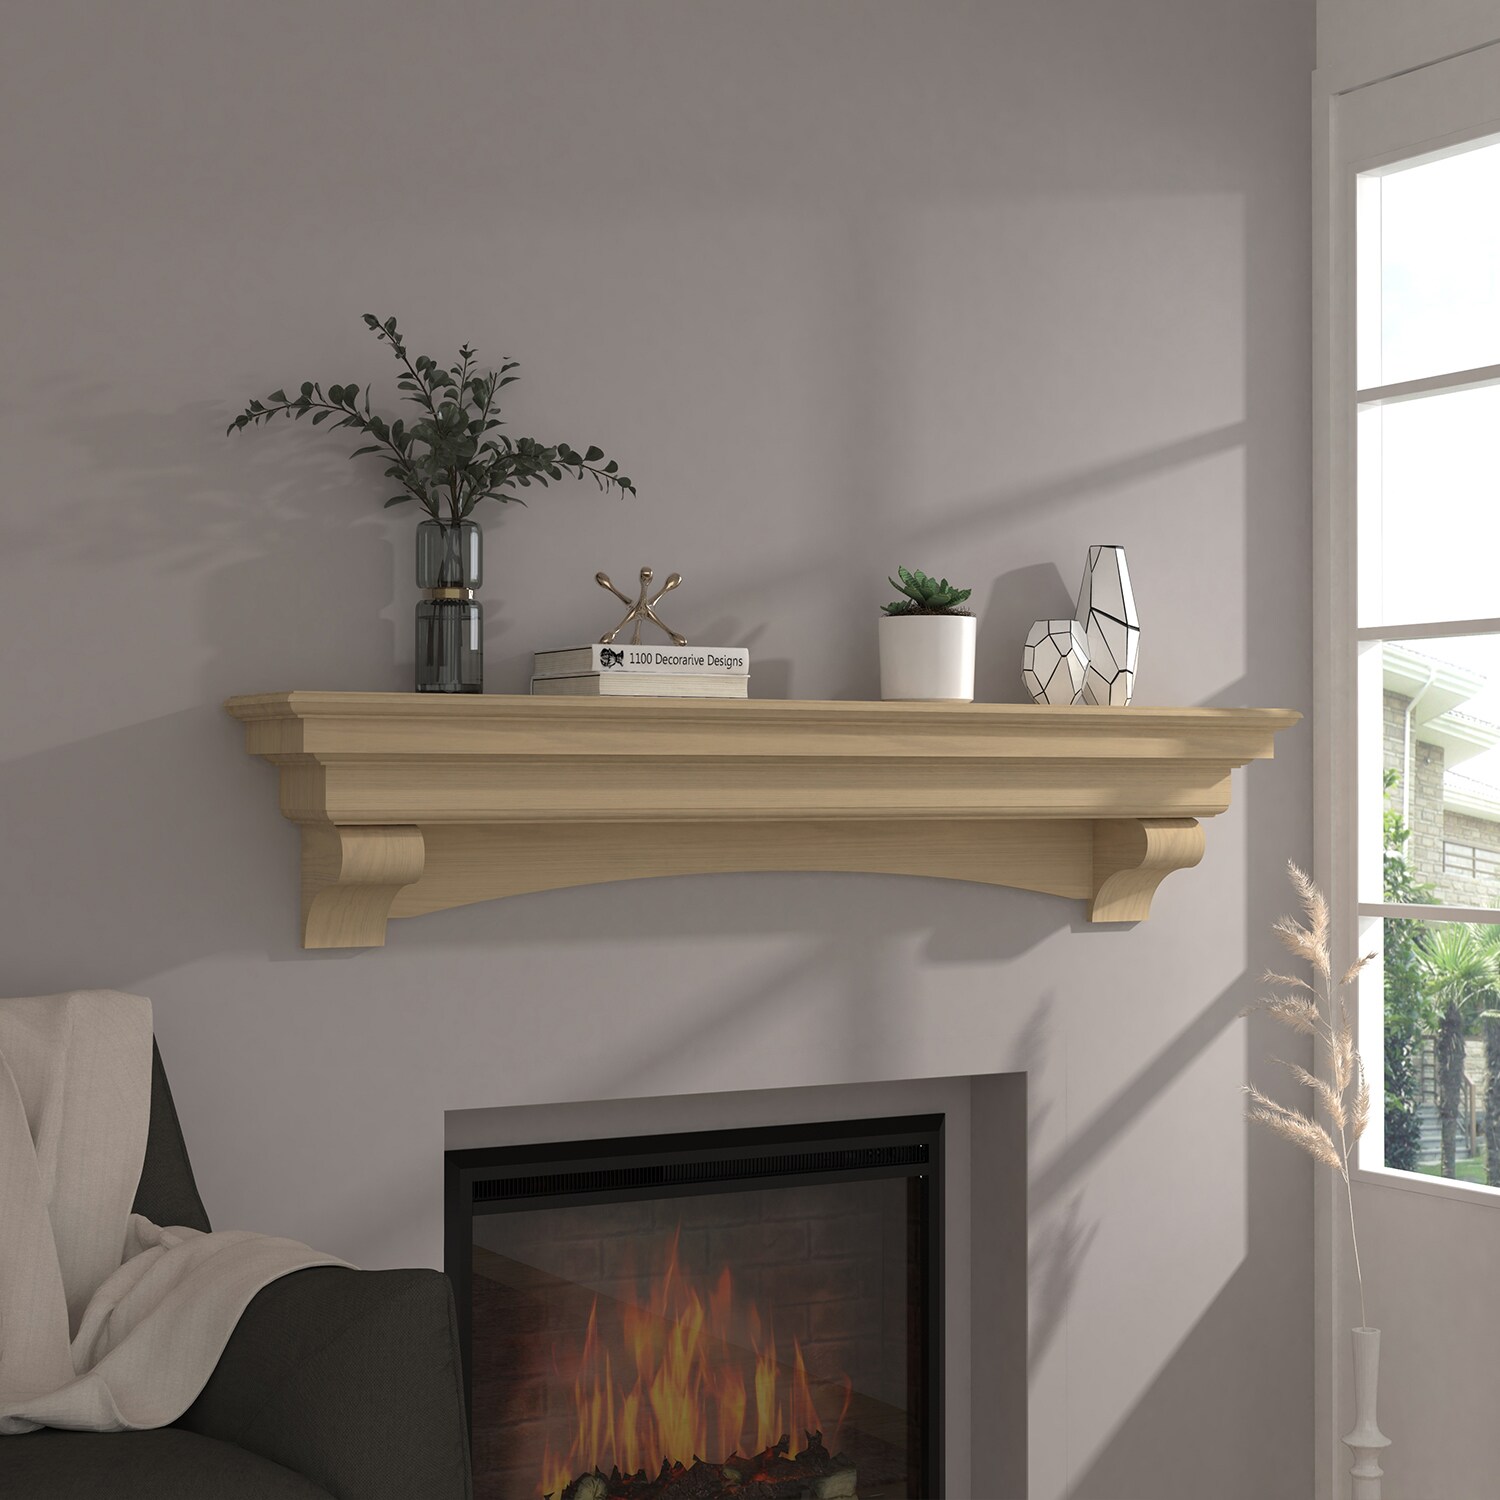 Cloud Mountain Designed for a contemporary setup, the Fireplace